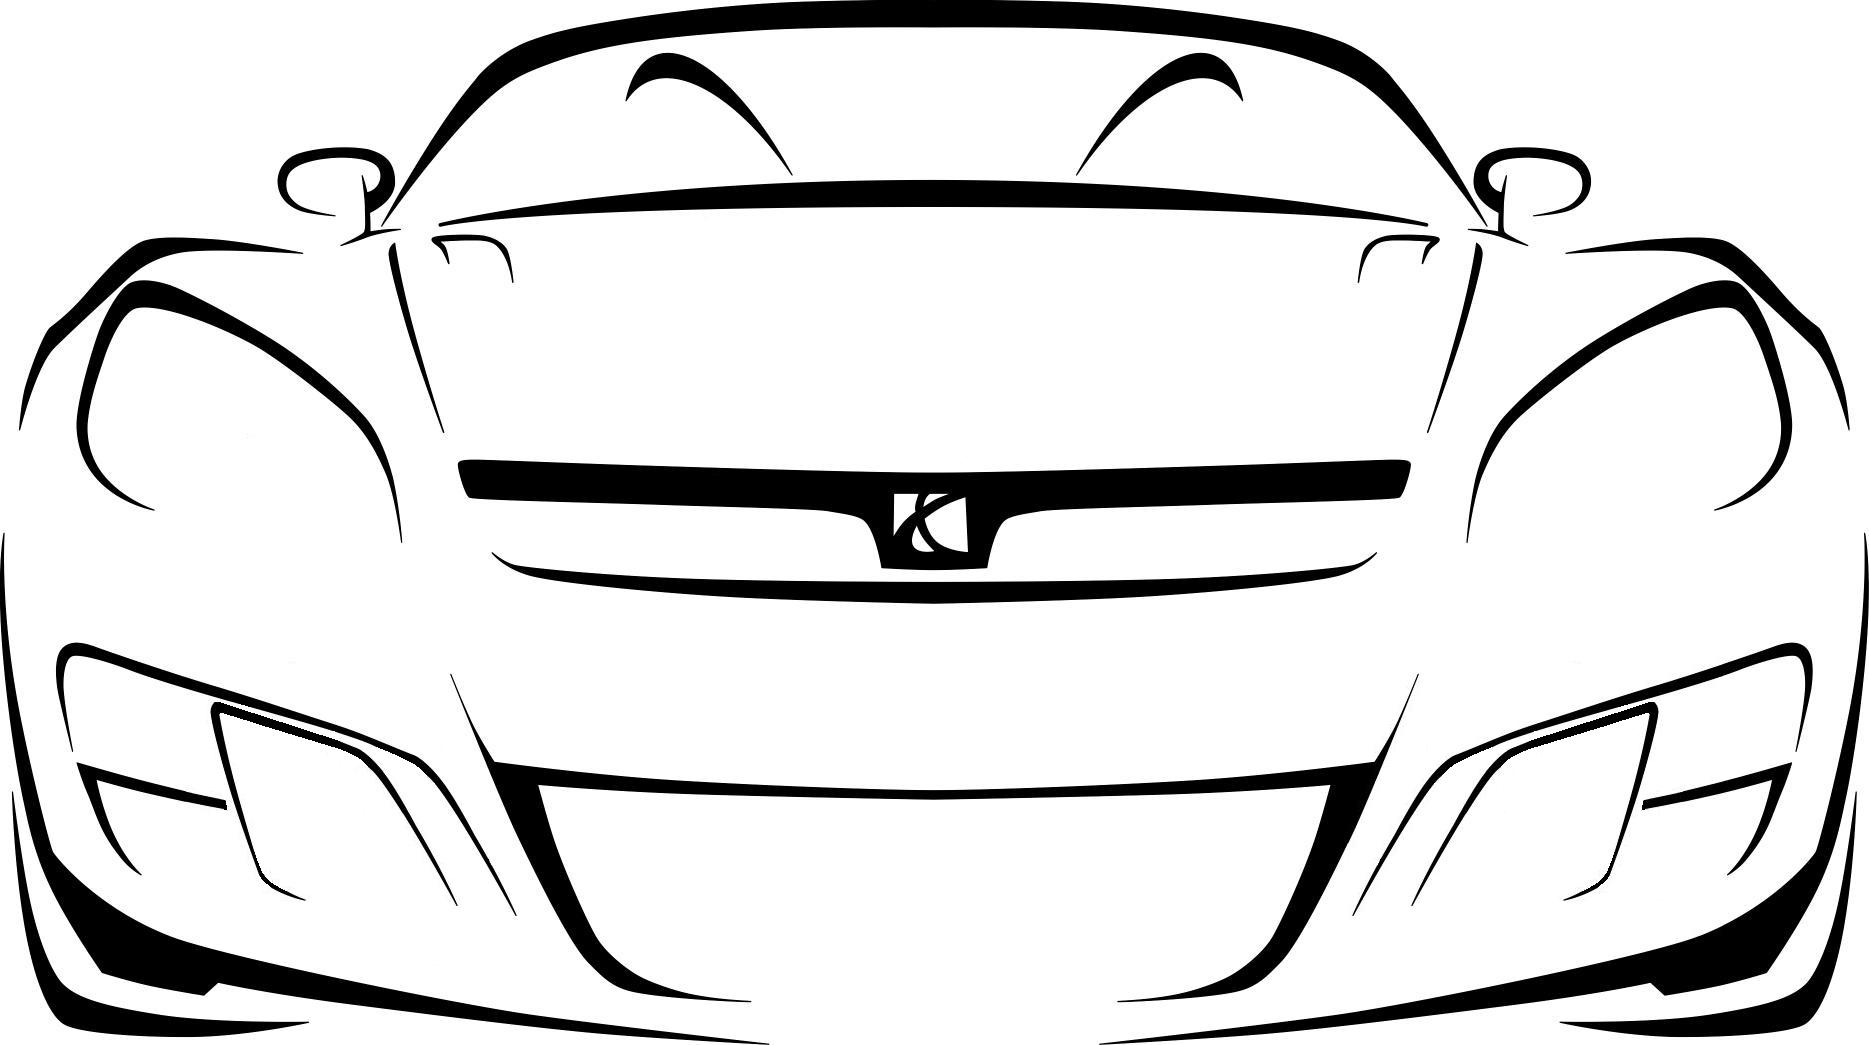 Outlines Of Cars - Clipart library